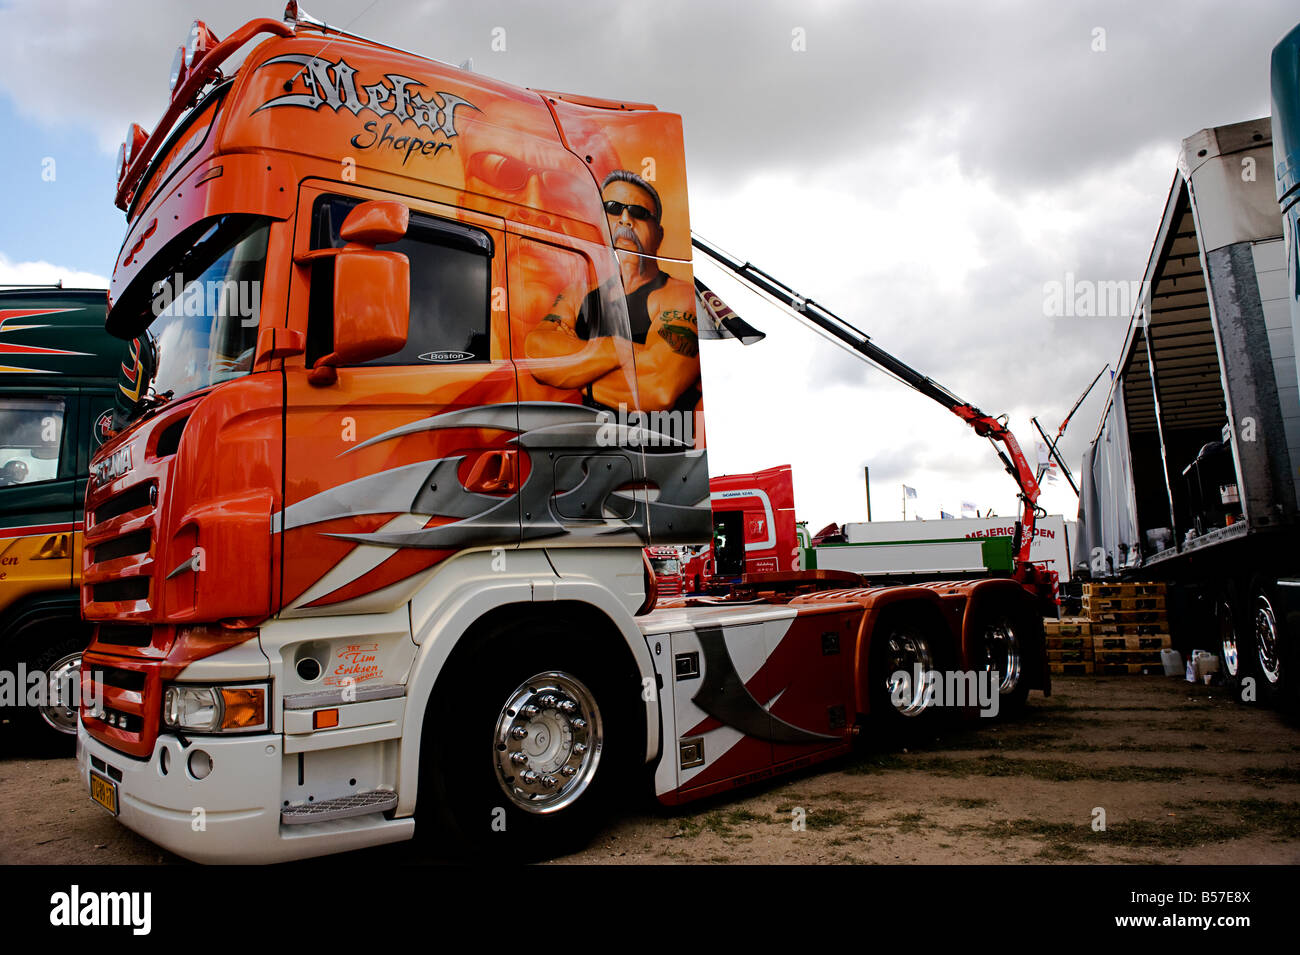 Scania truck decorated with clearly inspiration from the orange county chopper series Stock Photo